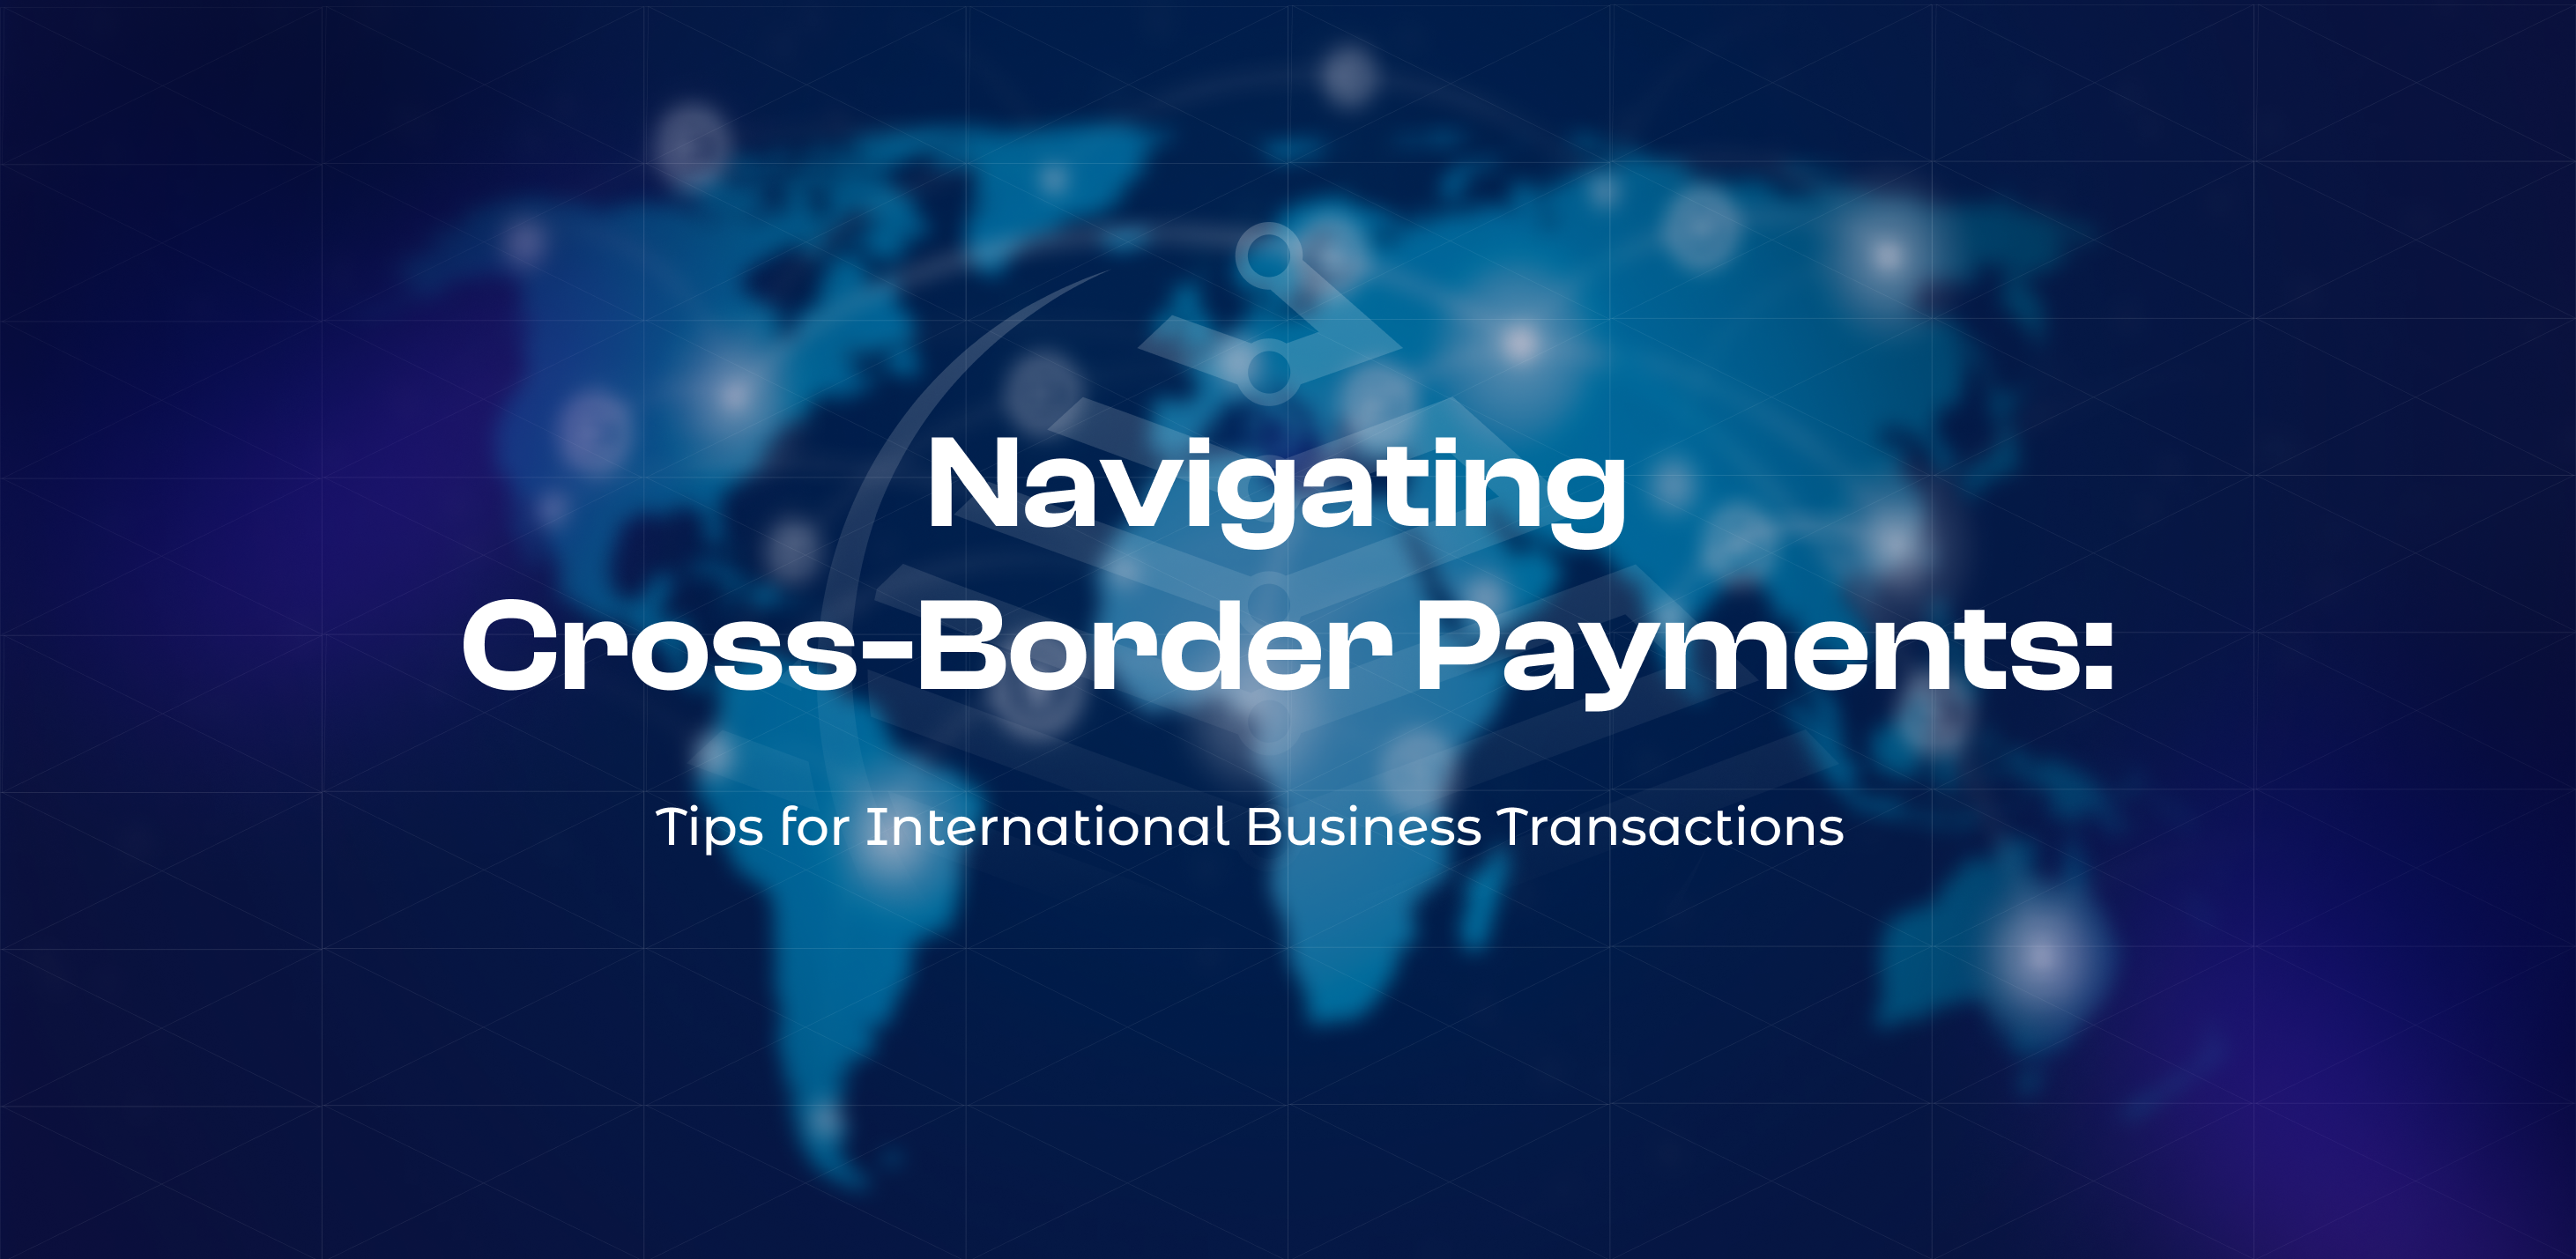 Navigating Cross-Border Payments: Tips for International Business Transactions